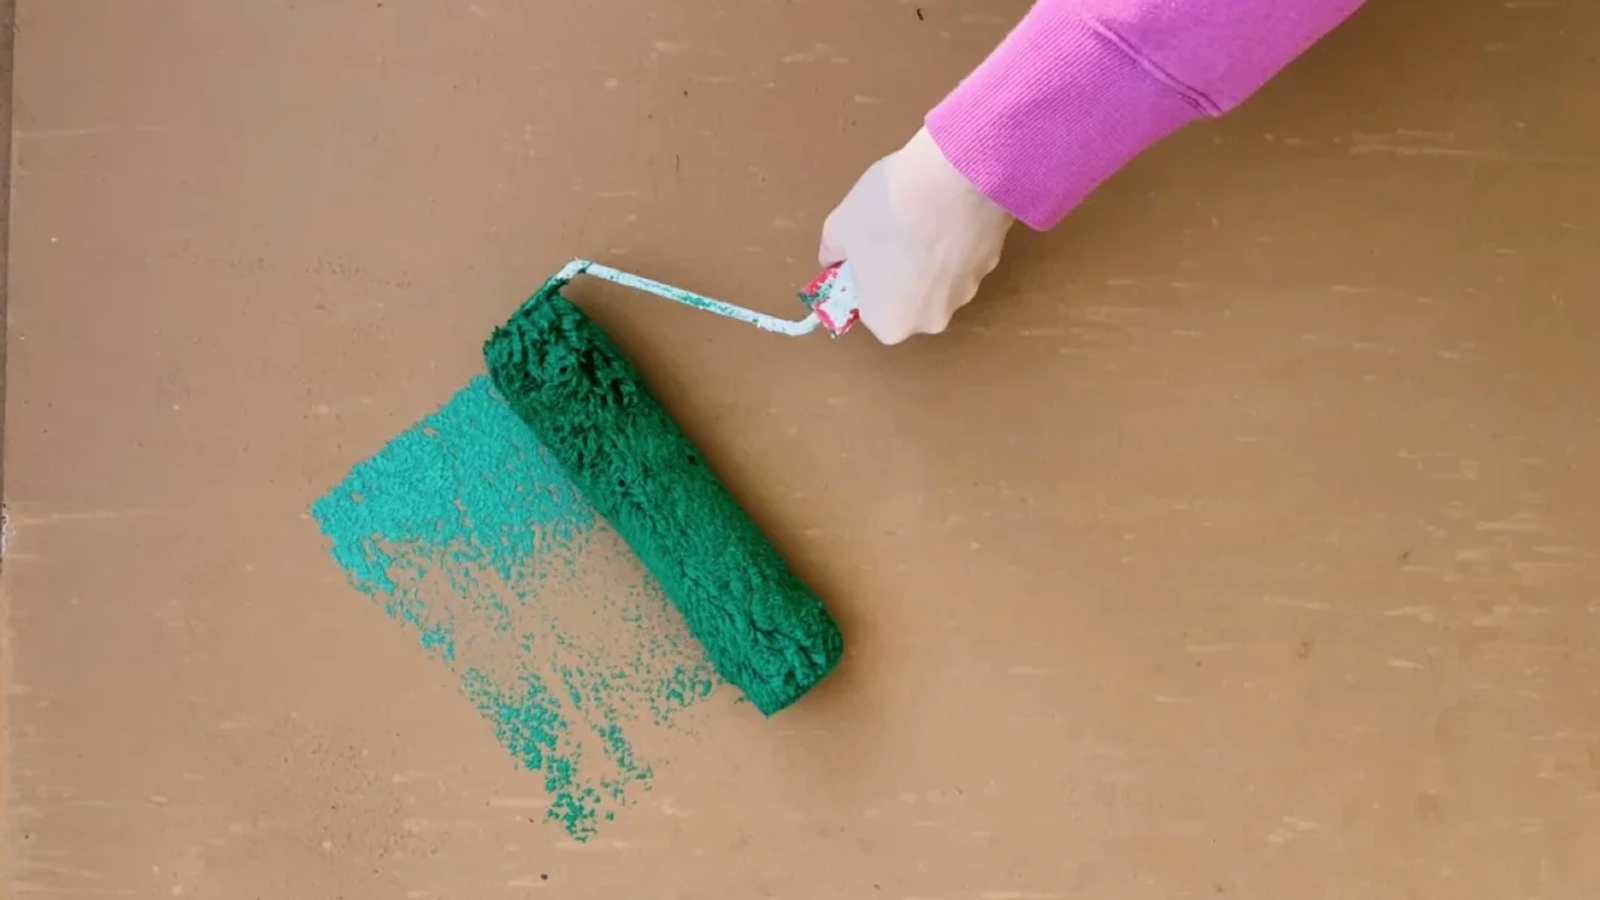 A paint roller with green paint being painted onto a wooden board by a hand